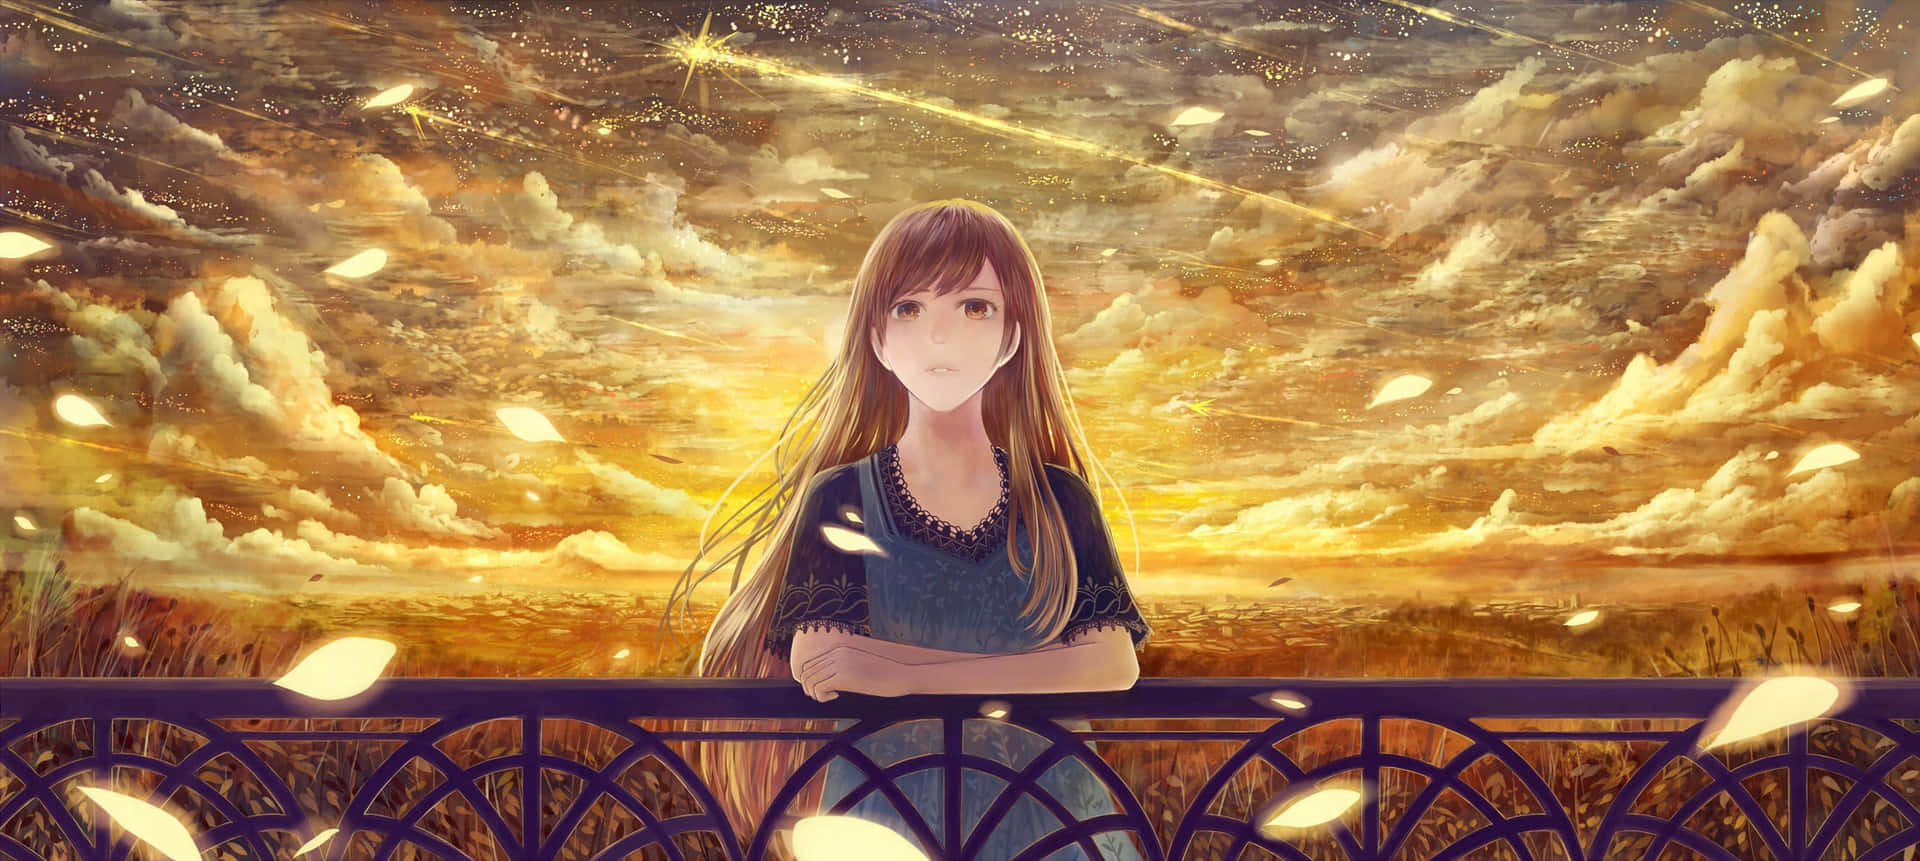 An emotional portrait of a beautiful anime girl seemingly mourning something. Wallpaper